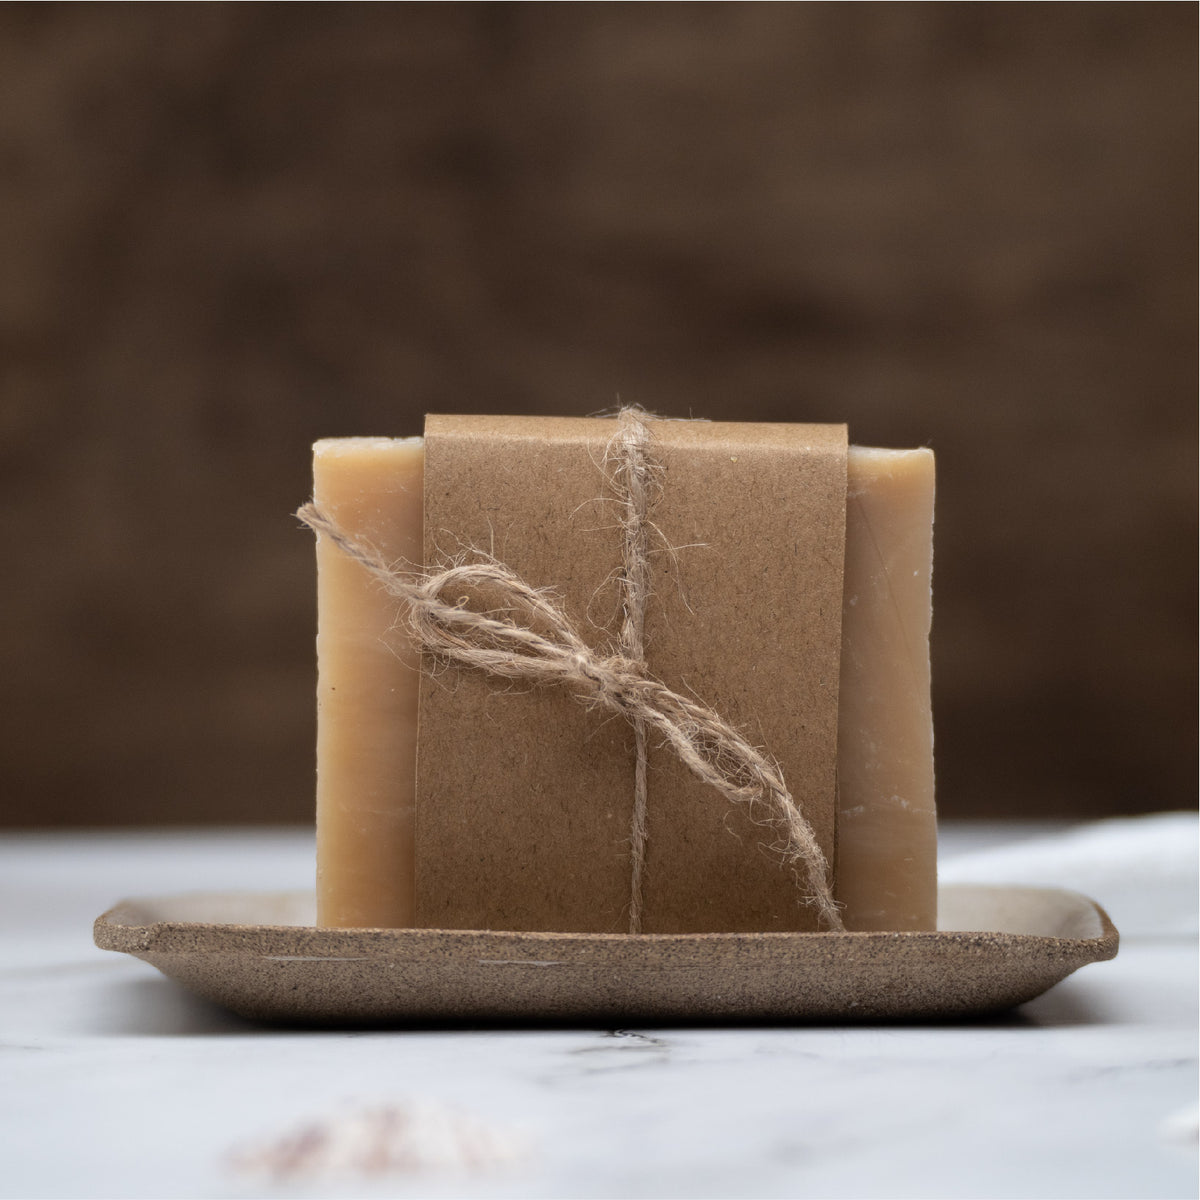 Coconut Margarita Soap With Olive Oil and Shea